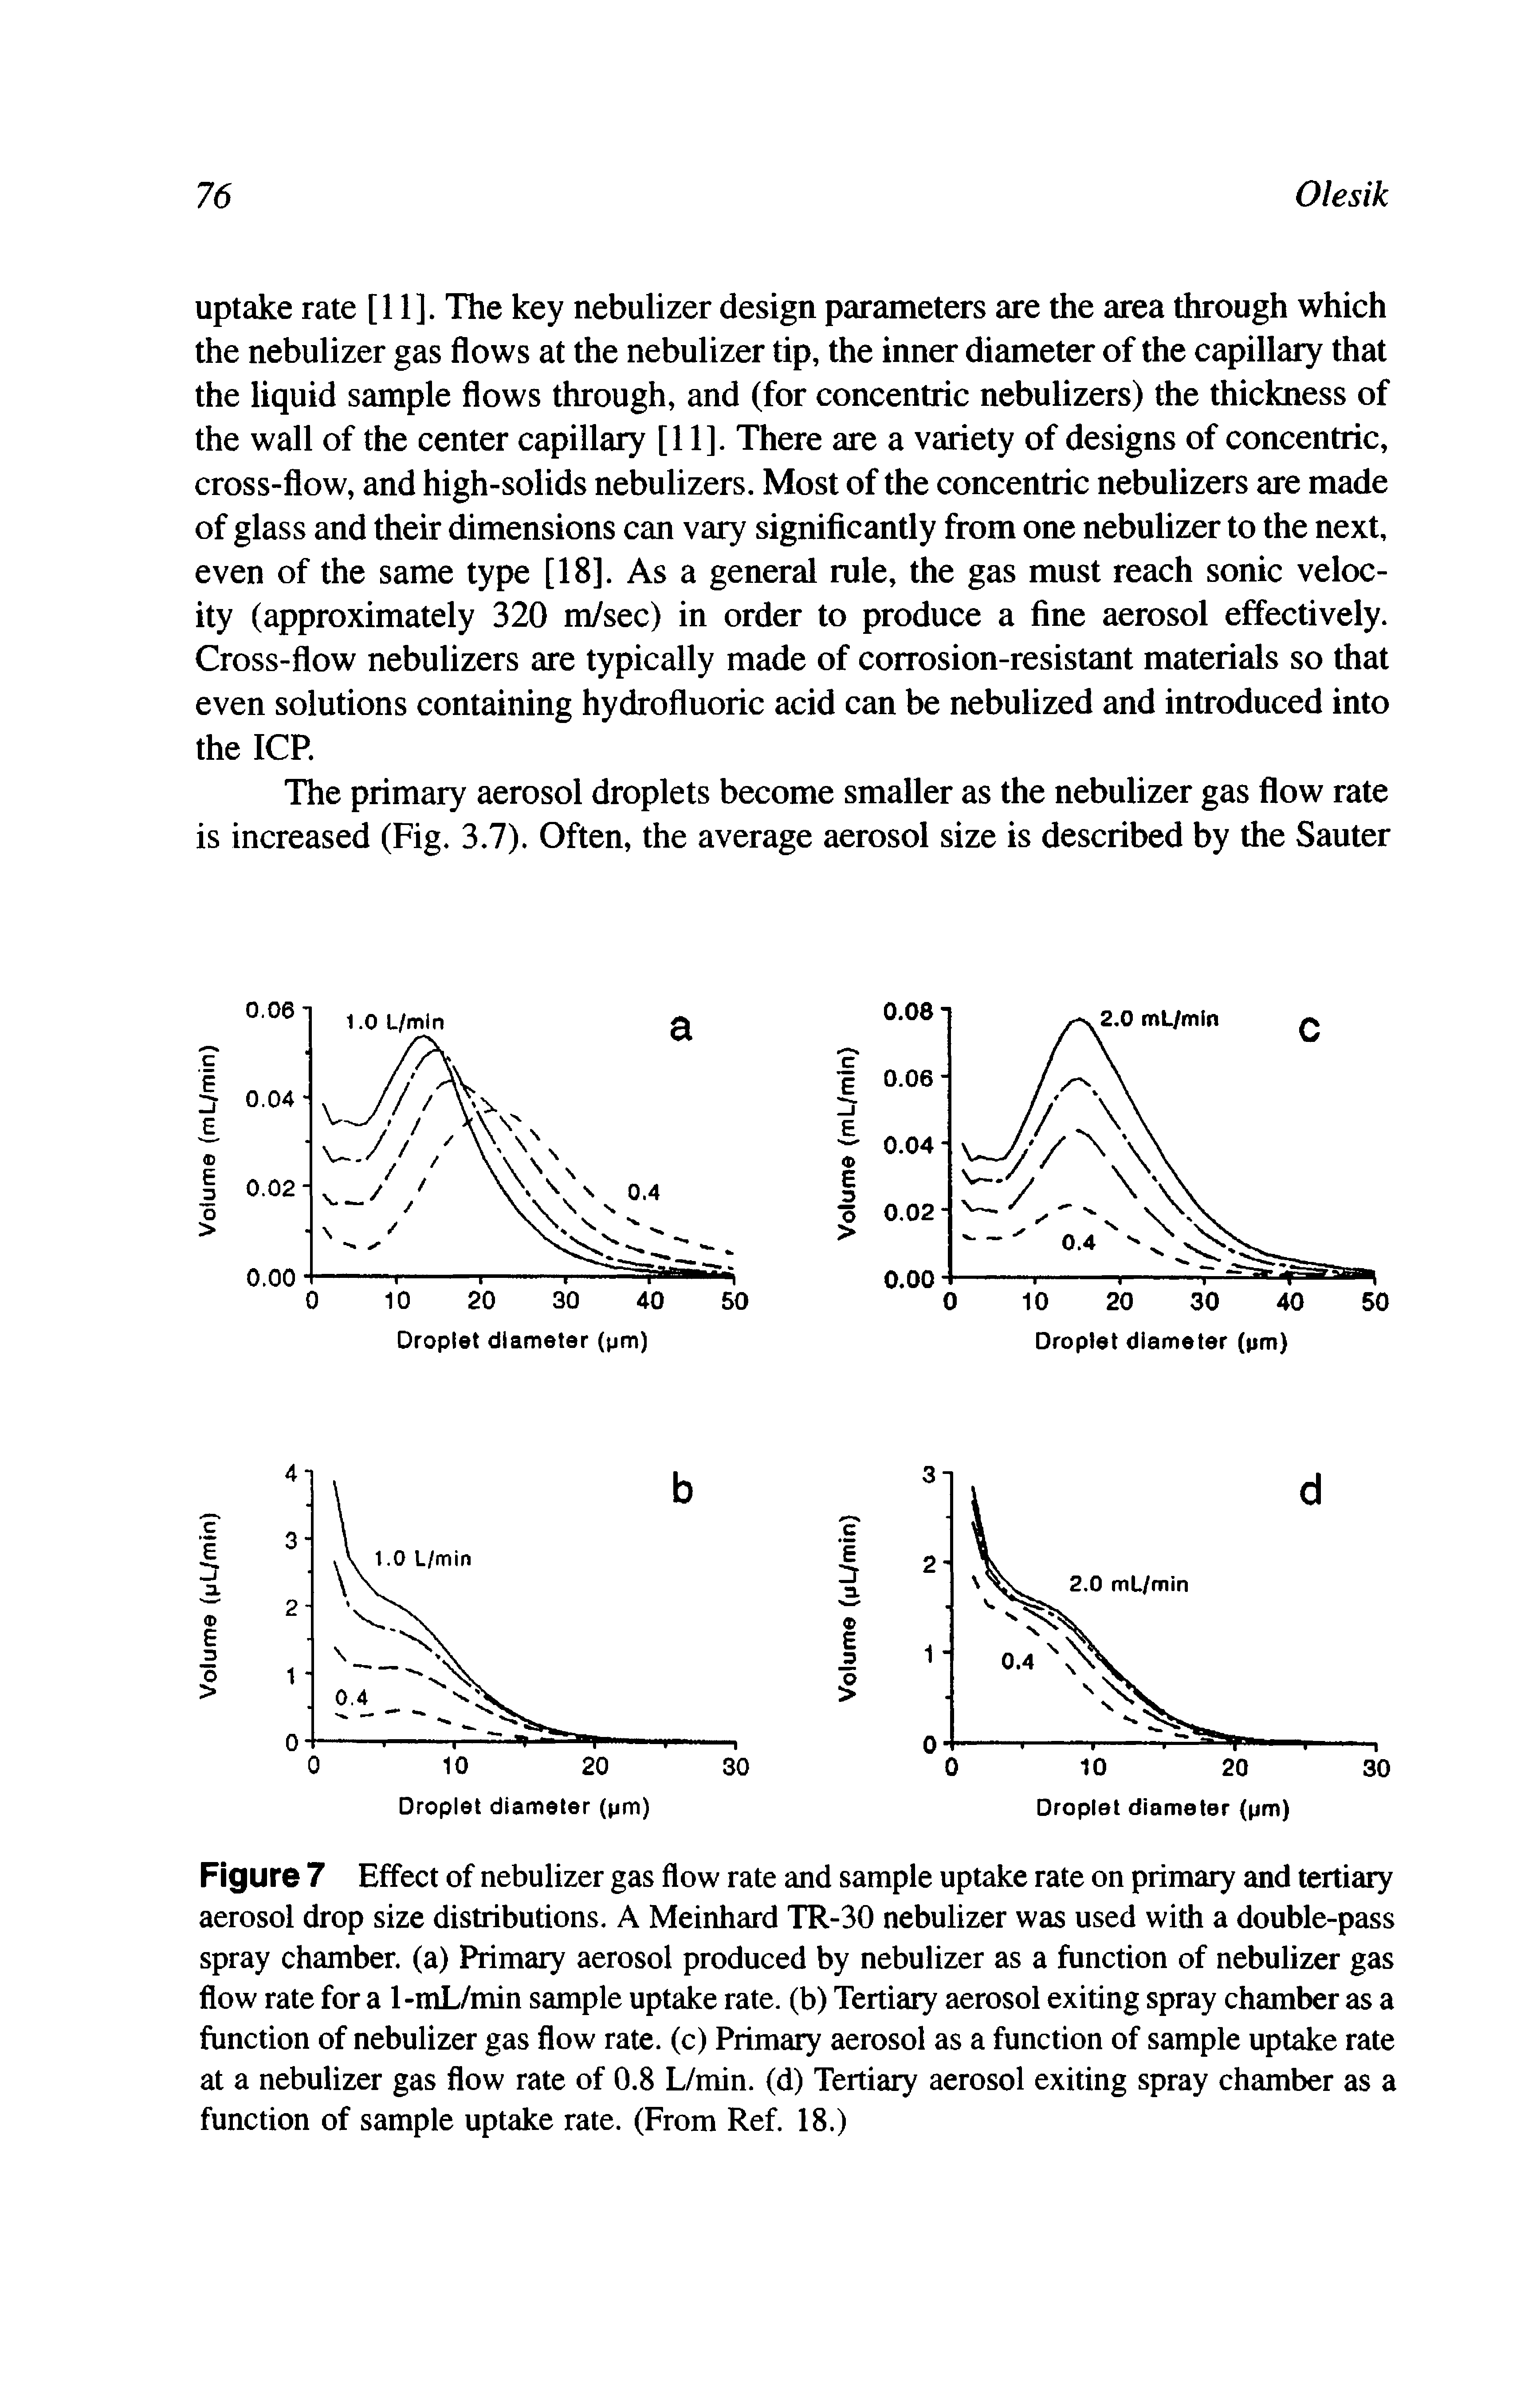 Figure 7 Effect of nebulizer gas flow rate and sample uptake rate on primary and tertiary aerosol drop size distributions. A Meinhard TR-30 nebulizer was used with a double-pass spray chamber, (a) Primary aerosol produced by nebulizer as a function of nebulizer gas flow rate for a 1-mL/min sample uptake rate, (b) Tertiary aerosol exiting spray chamber as a function of nebulizer gas flow rate, (c) Primary aerosol as a function of sample uptake rate at a nebulizer gas flow rate of 0.8 L/min. (d) Tertiary aerosol exiting spray chamber as a function of sample uptake rate. (From Ref. 18.)...